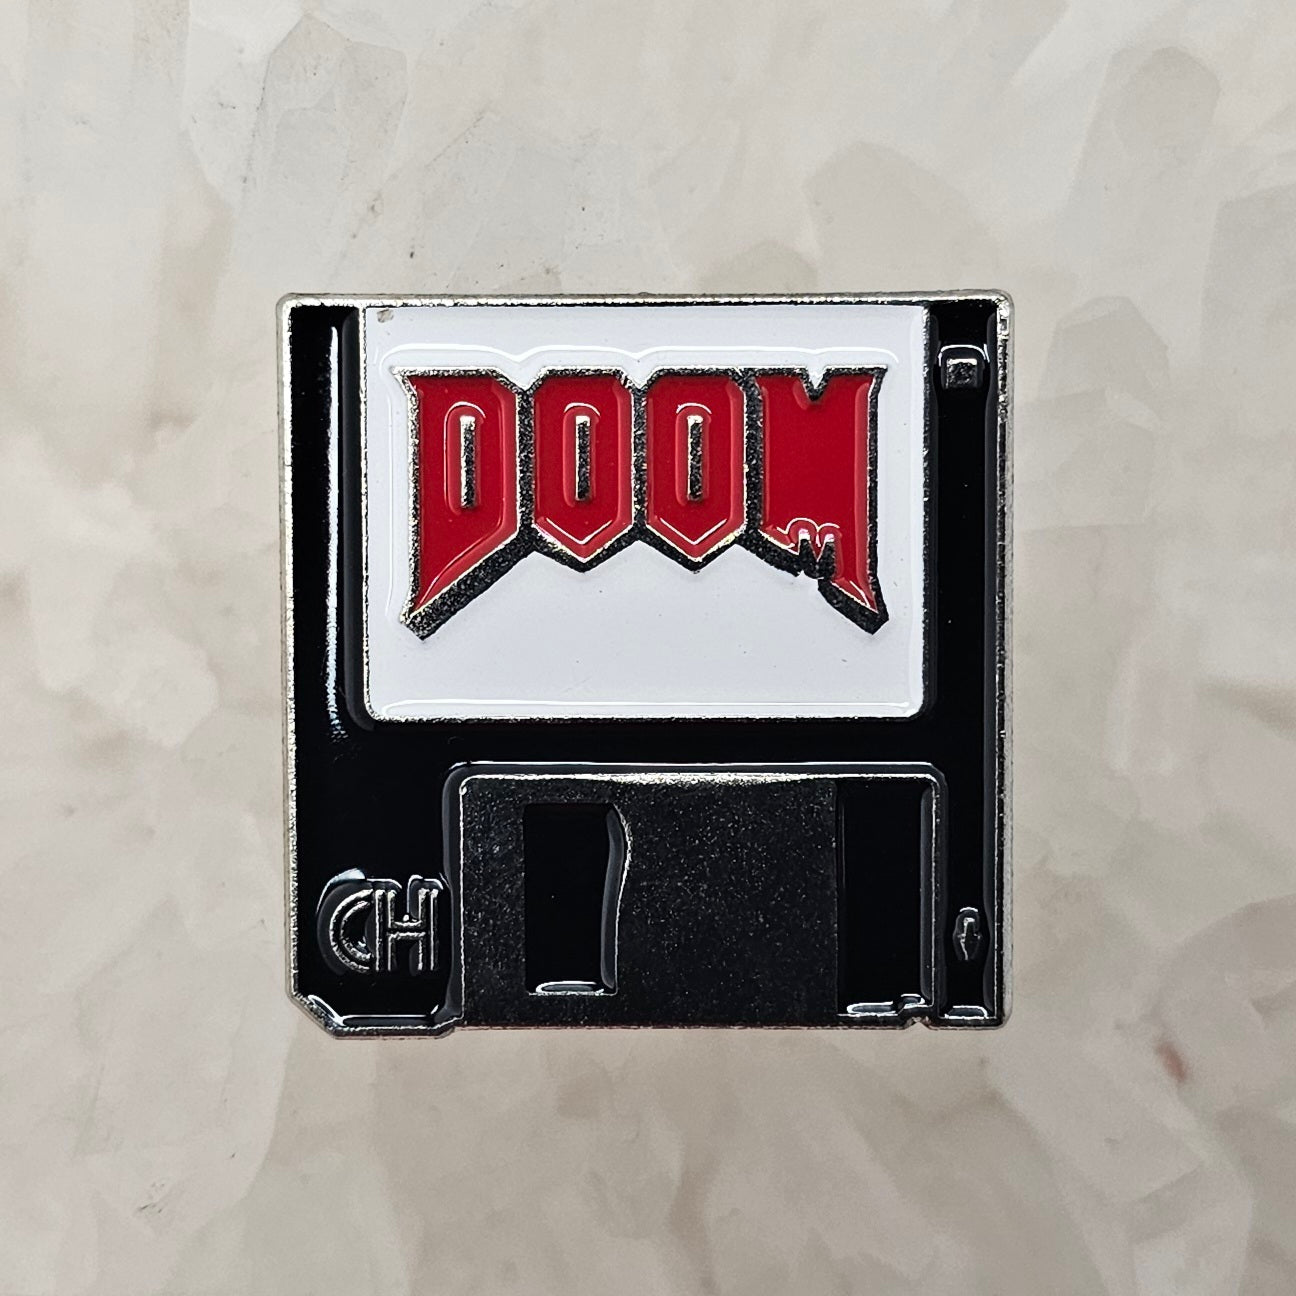 Doom Floppy Rampage Classic Video Game Relic Enamel Pins Hat Pins Lapel Pin Brooch Badge Festival Pin